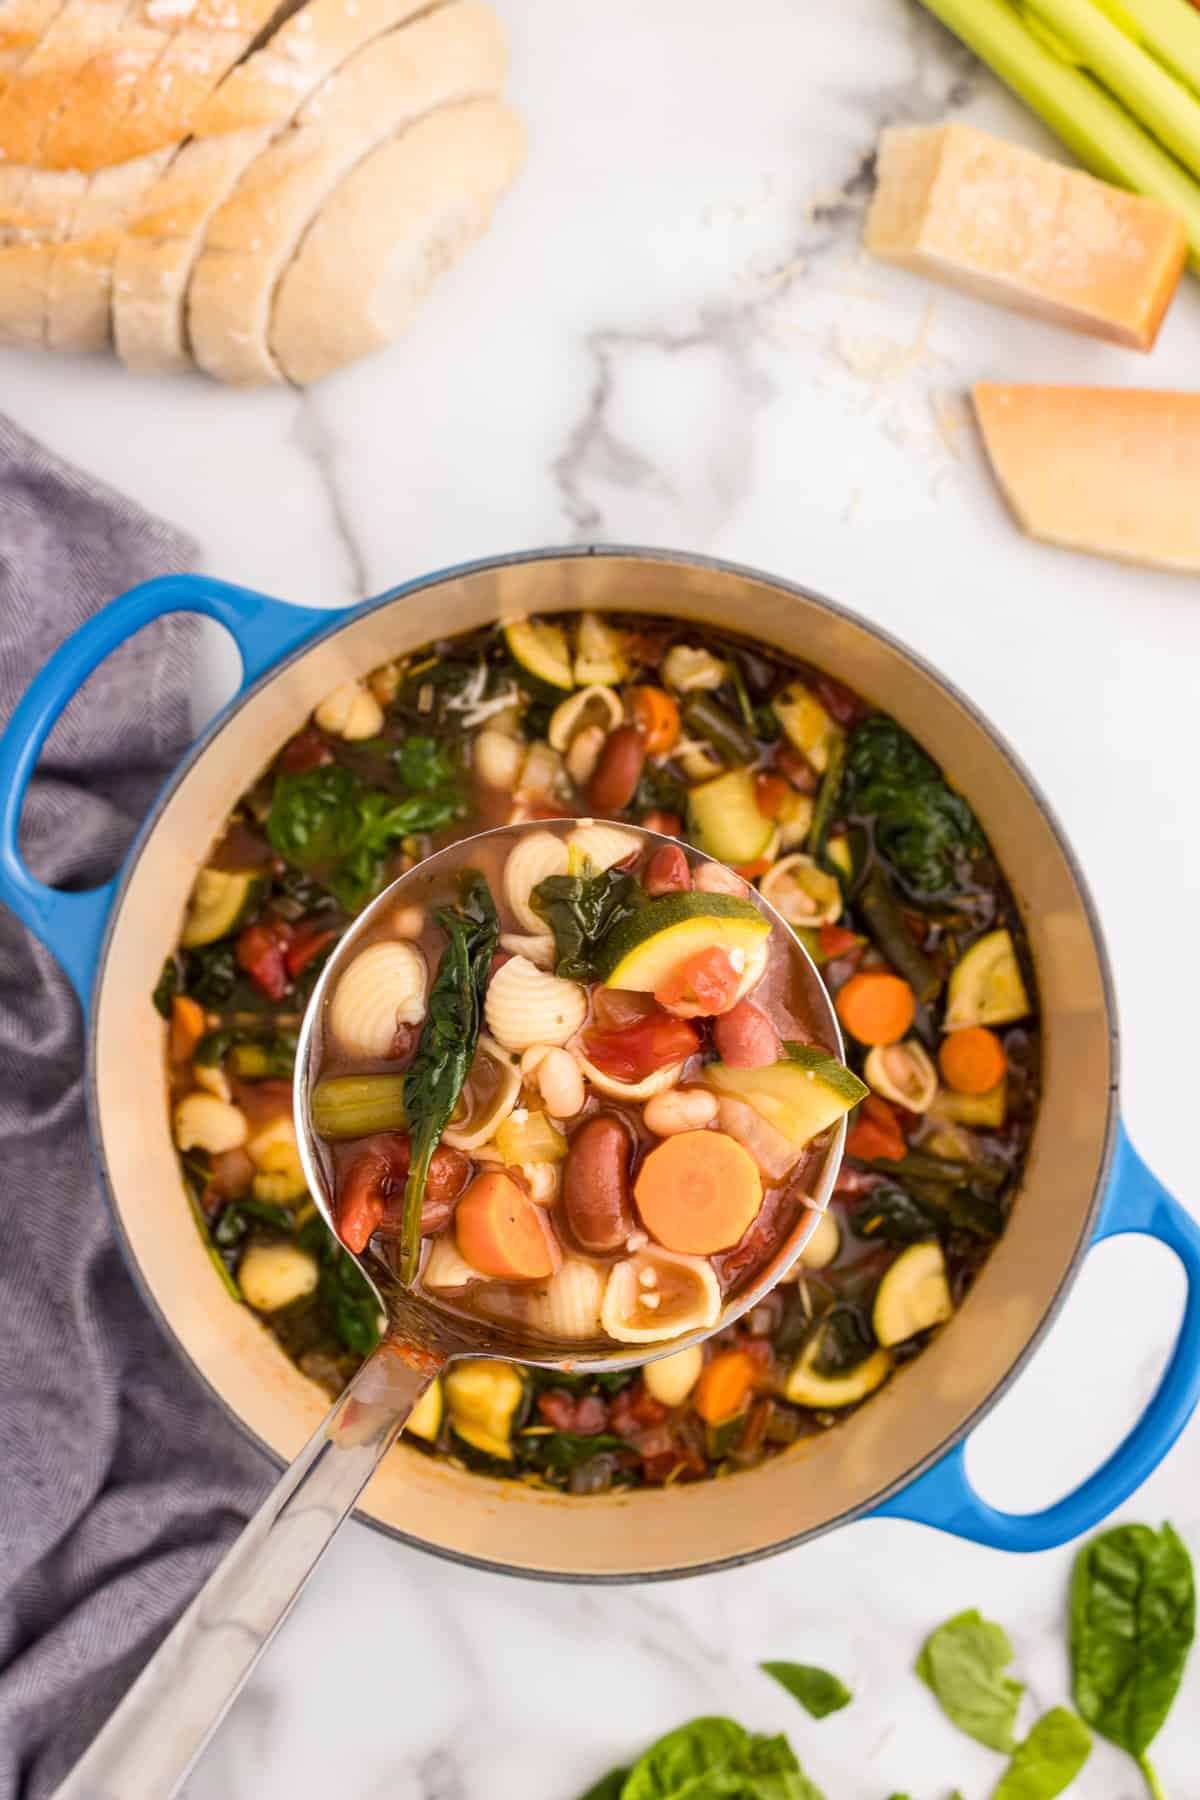 Using large laddle to scoop Minestrone Soup from dutch oven